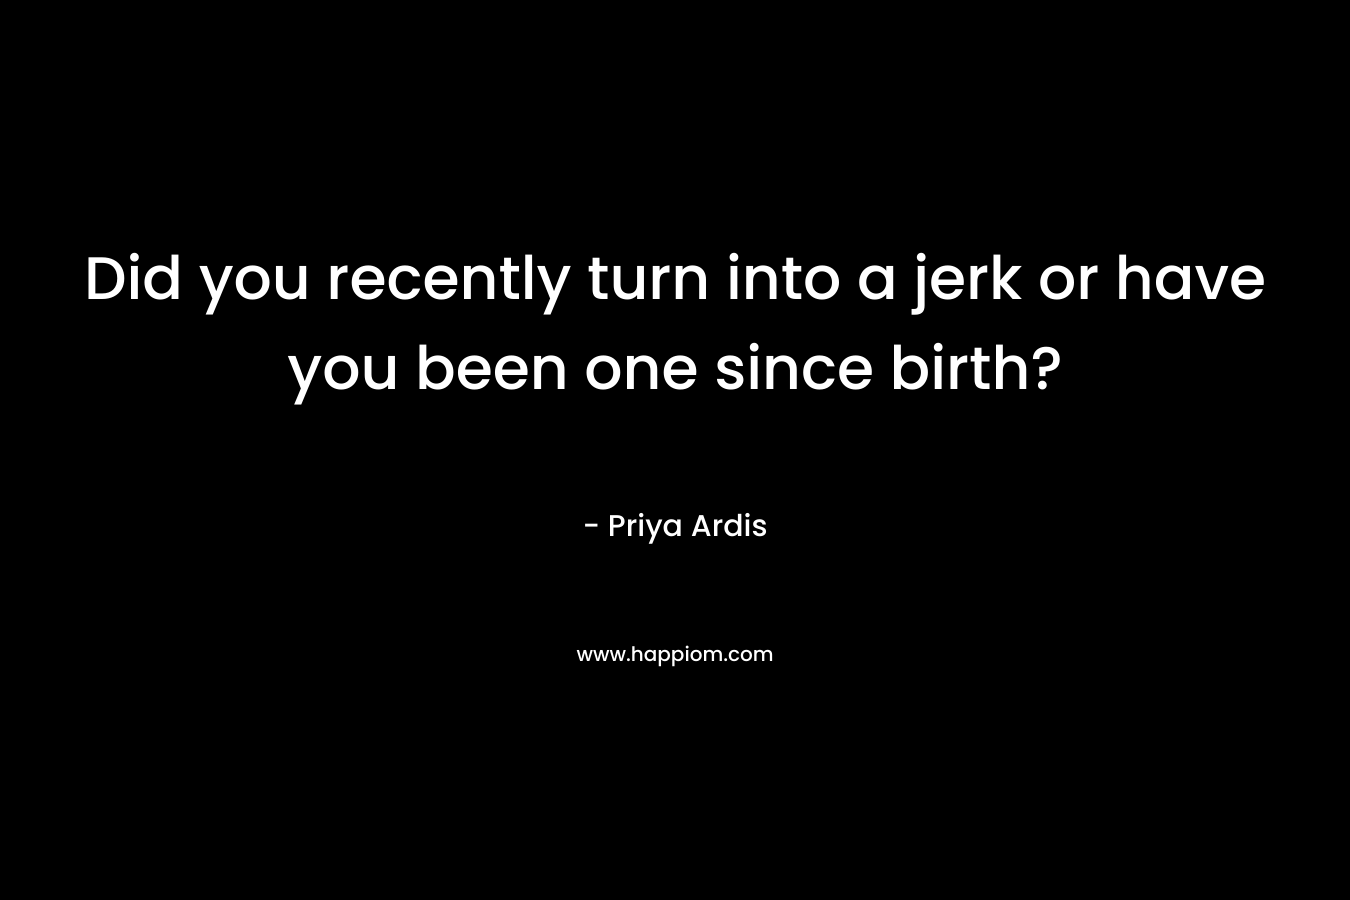 Did you recently turn into a jerk or have you been one since birth? – Priya Ardis